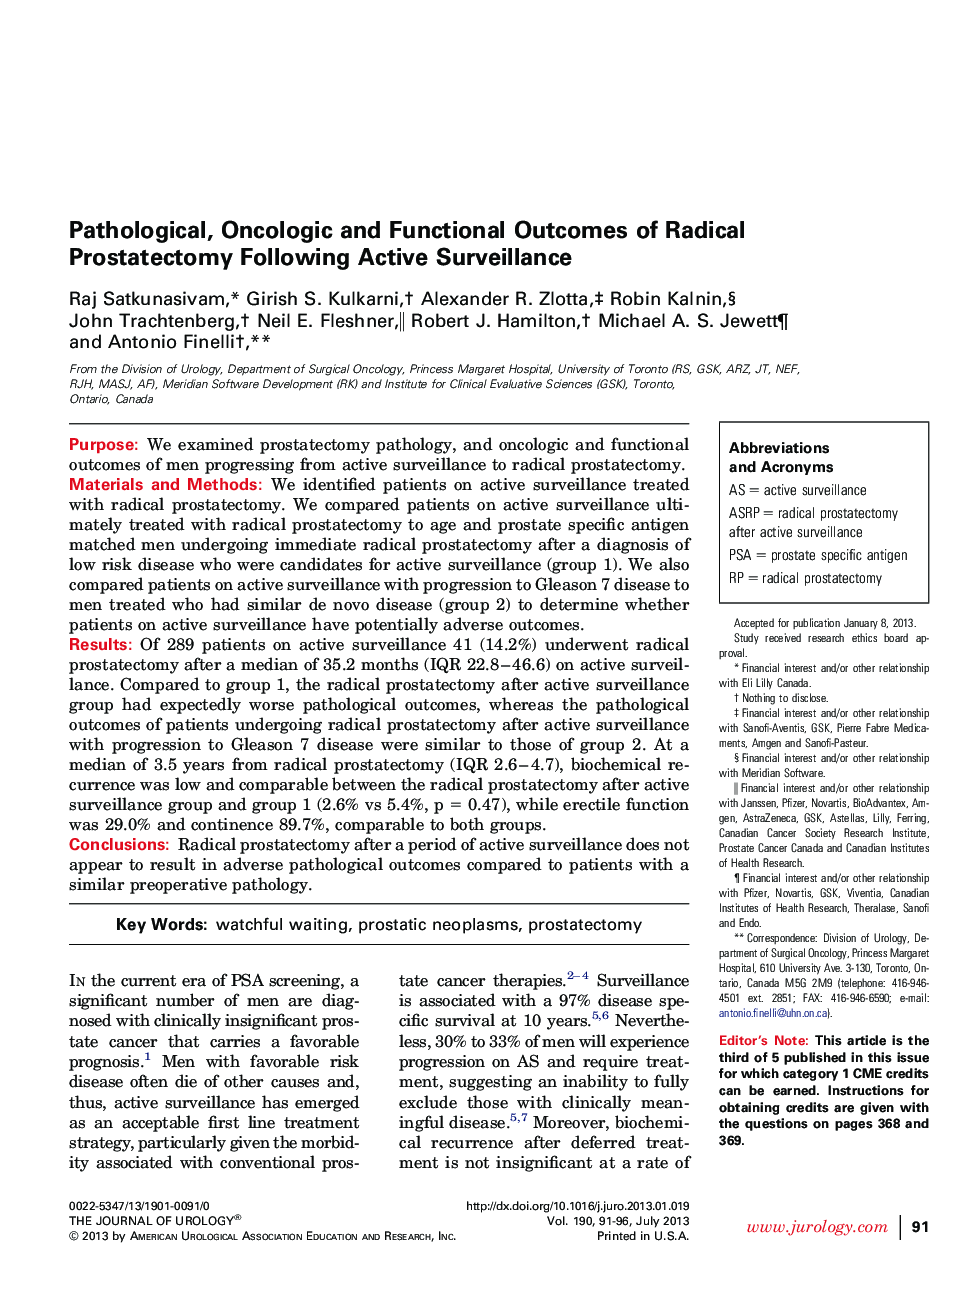 Pathological, Oncologic and Functional Outcomes of Radical Prostatectomy Following Active Surveillance 